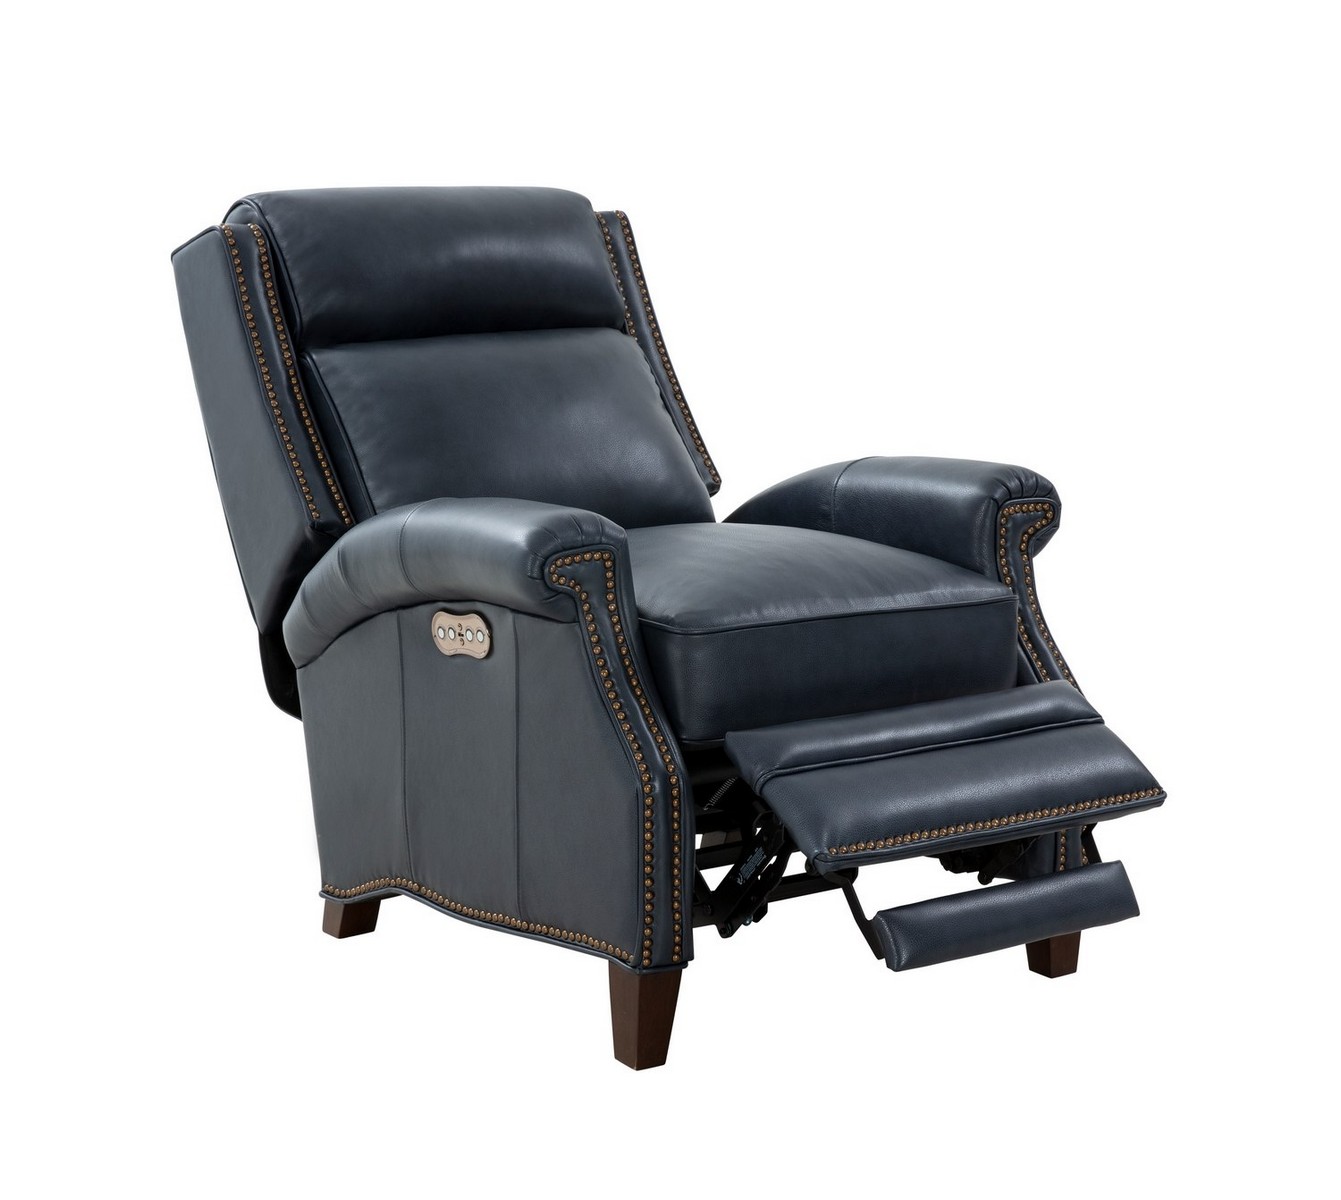 Barcalounger Barrett Power Recliner Chair with Power Head Rest - Barone Navy Blue/All Leather